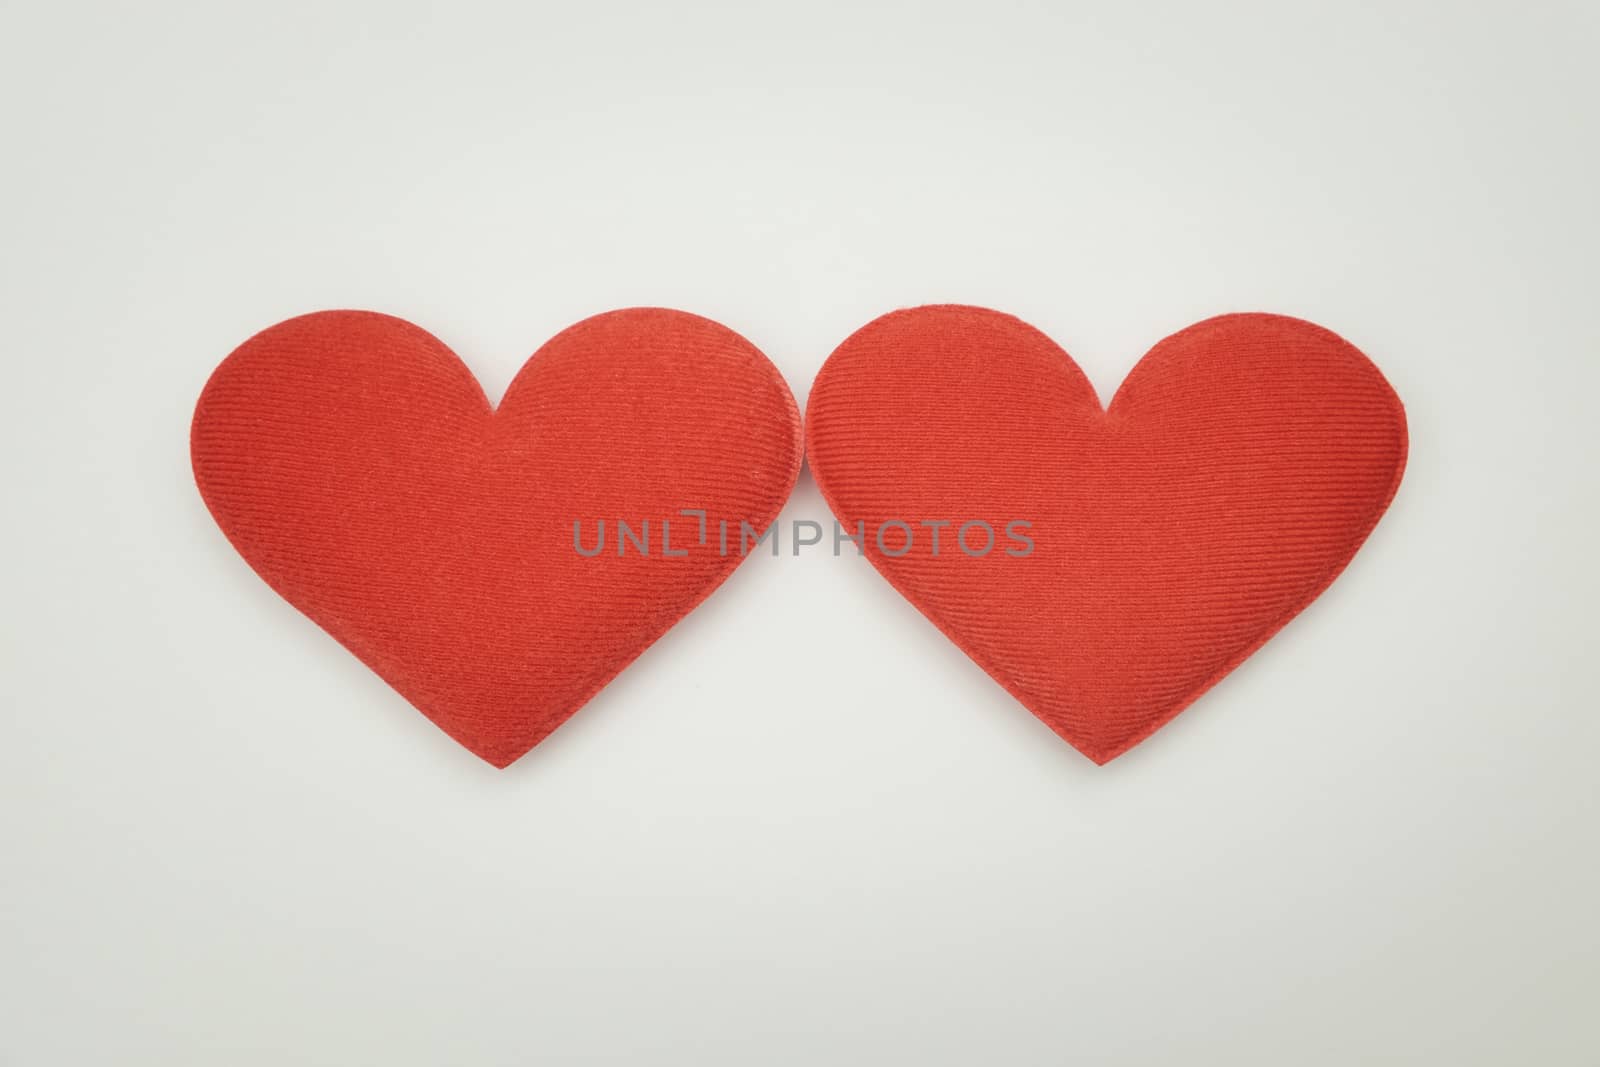 Heart-shaped on yellow background, valentine concept.